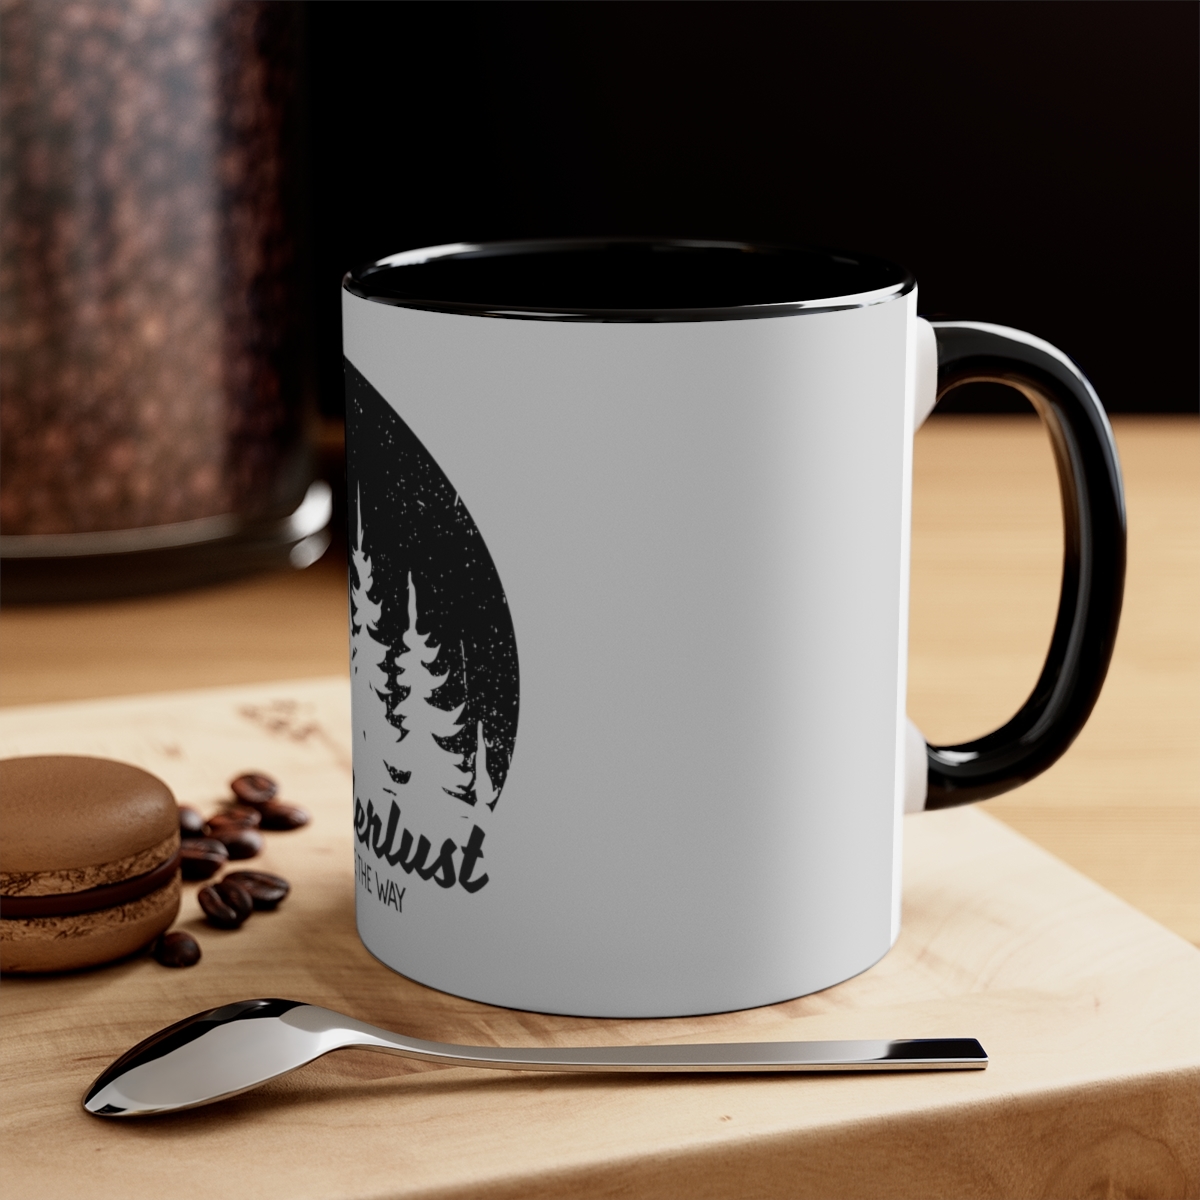 Primary image for Accent Coffee Mug, 11oz, Wanderlust Theme, Black and White Forest Image